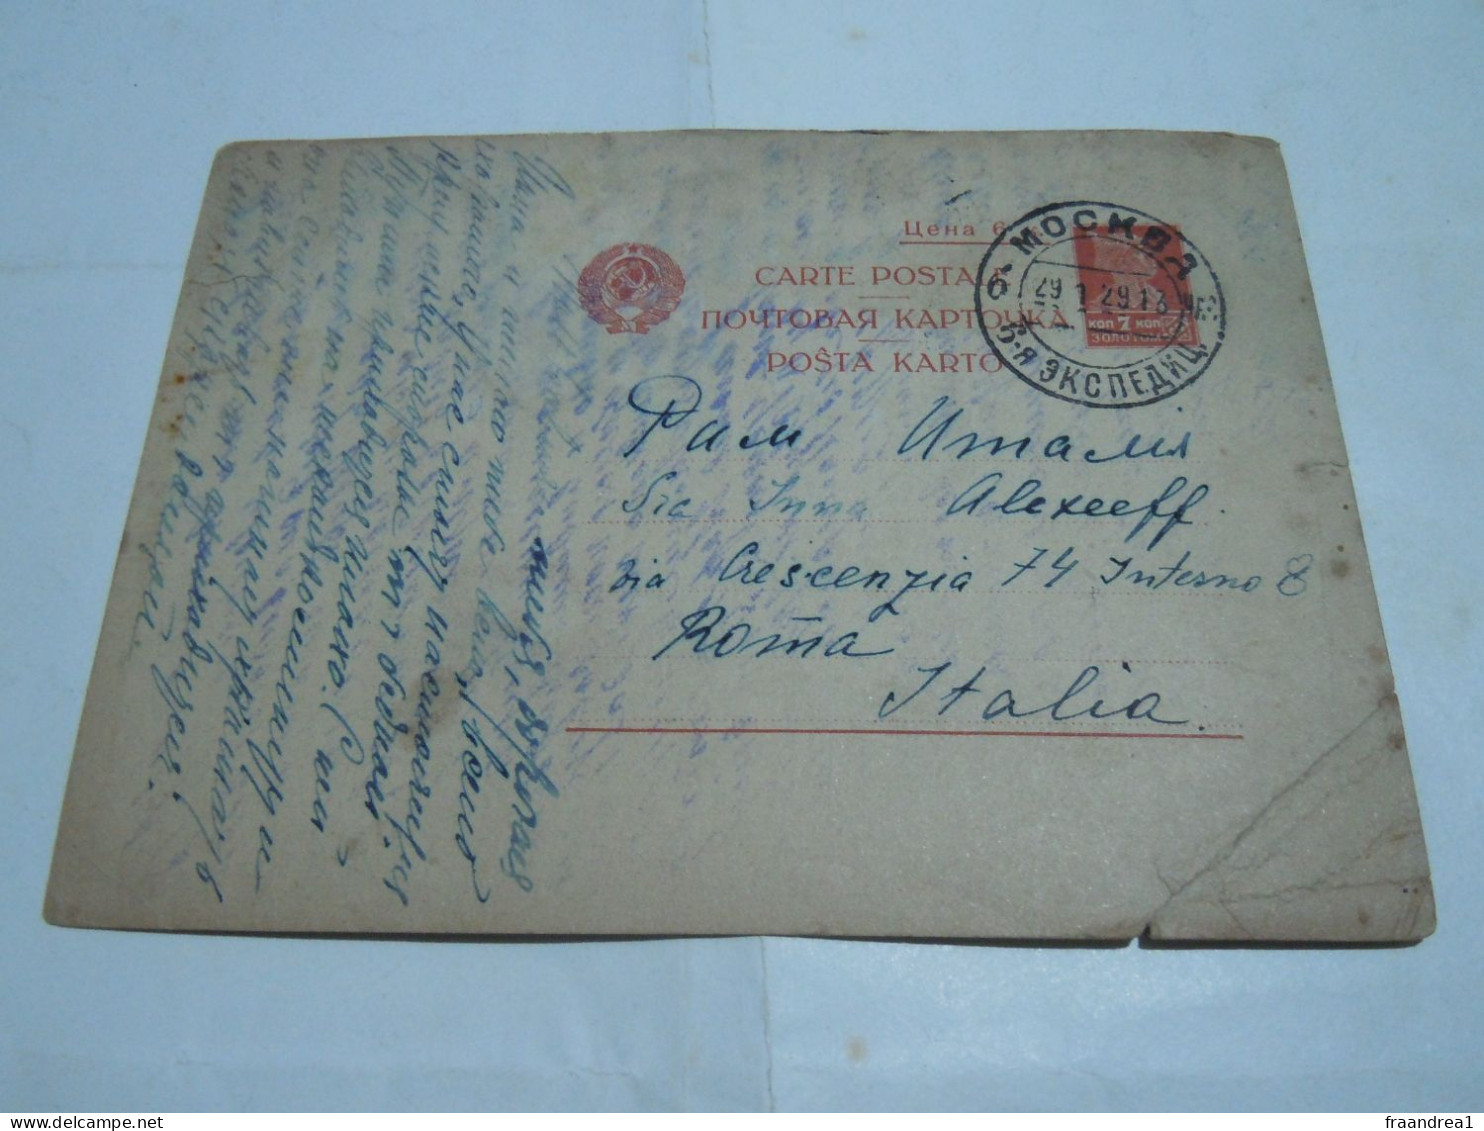 Russia USSR Postal Stationery Postcard Cover 1929  TO ROMA  ITALY - Briefe U. Dokumente